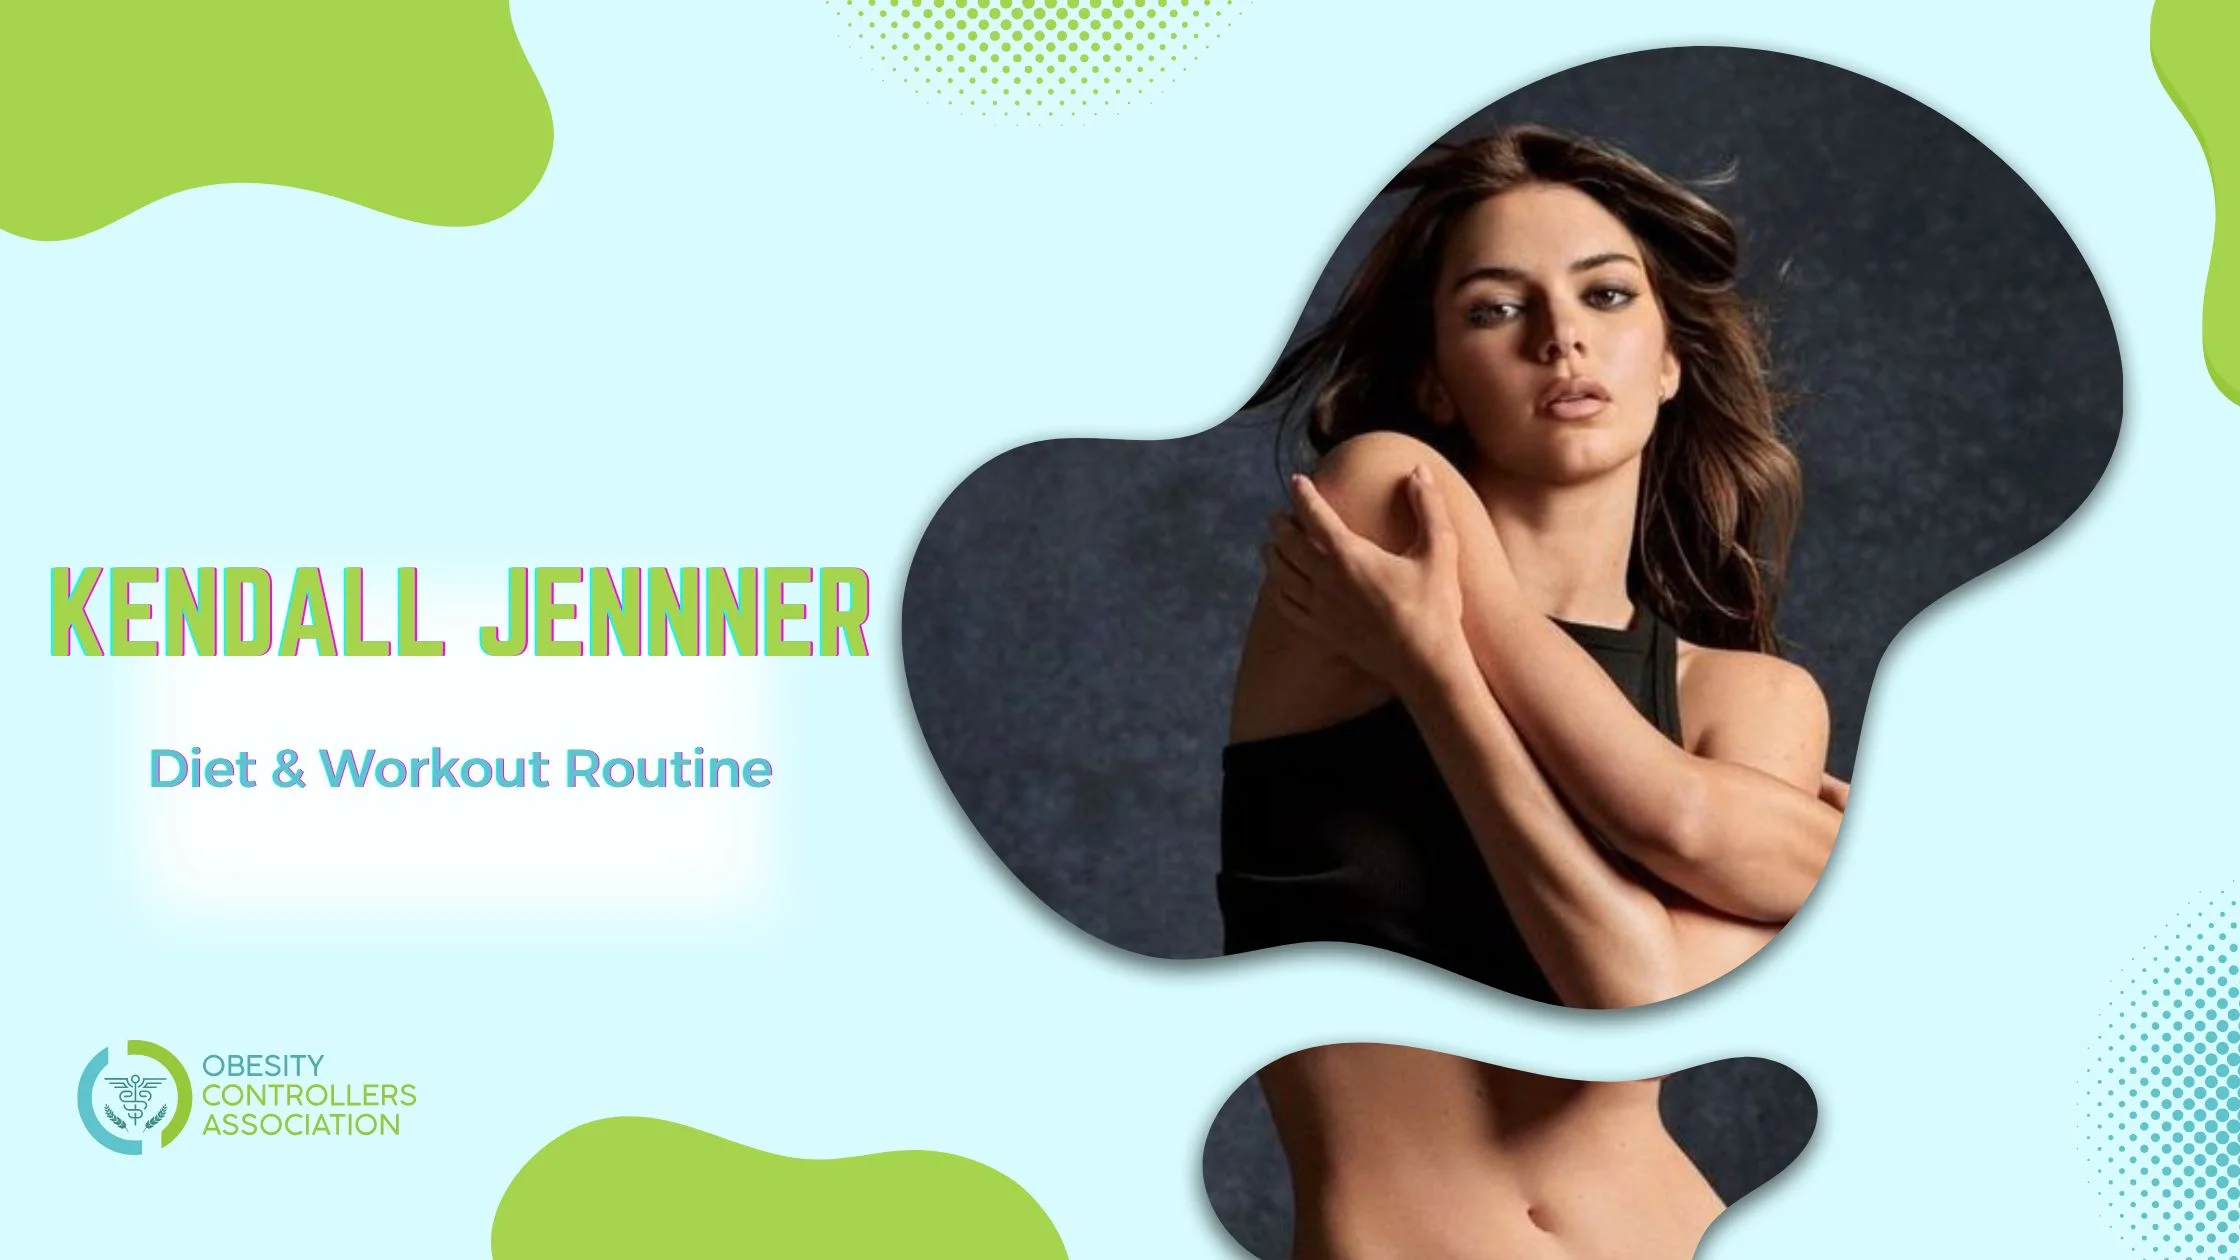 Kendall Jenner Diet and Workout